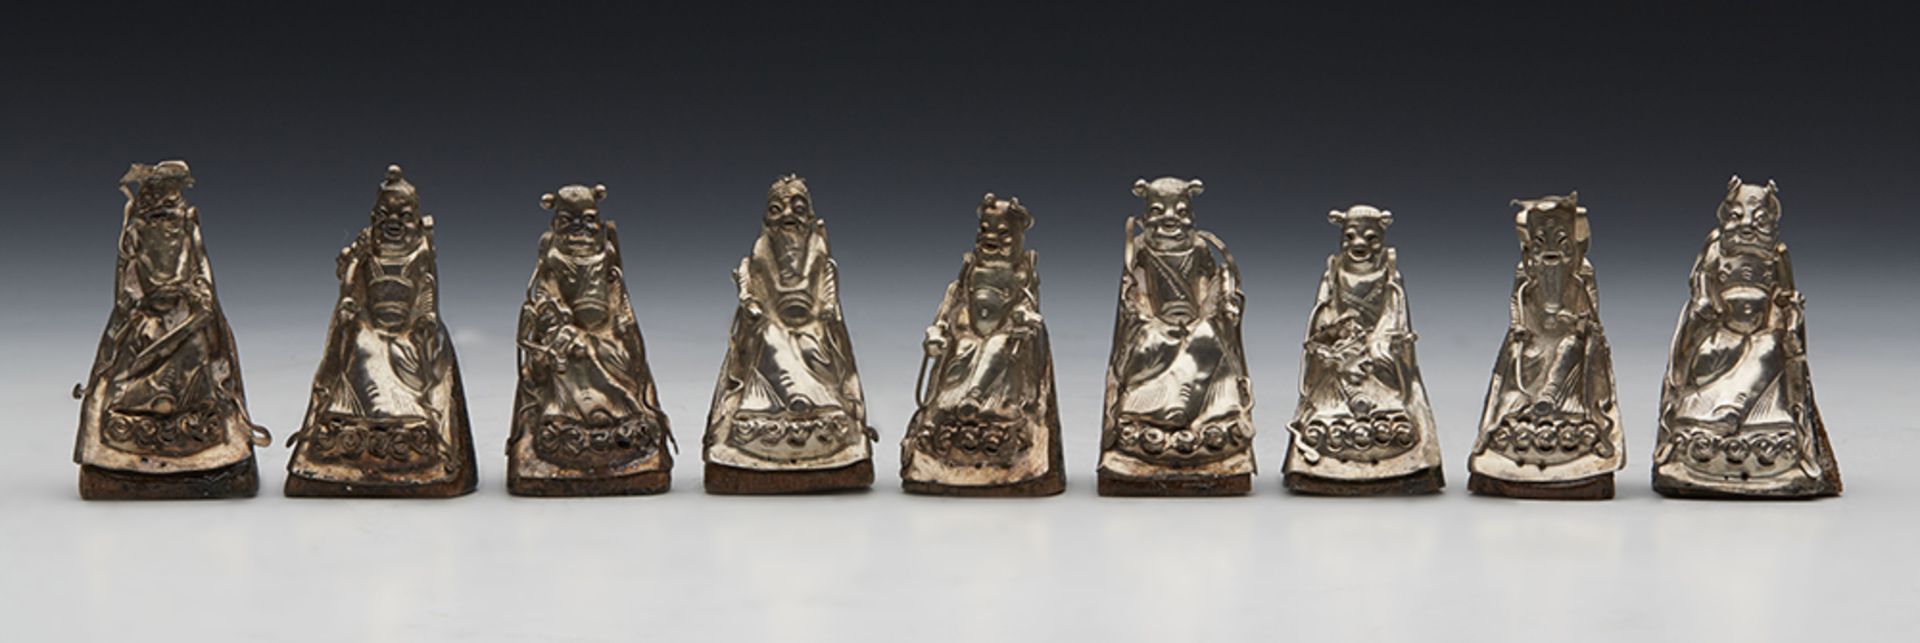 Antique Chinese Collection Nine Immortals Silver Menu/Place Holders 19Th C. - Image 2 of 10